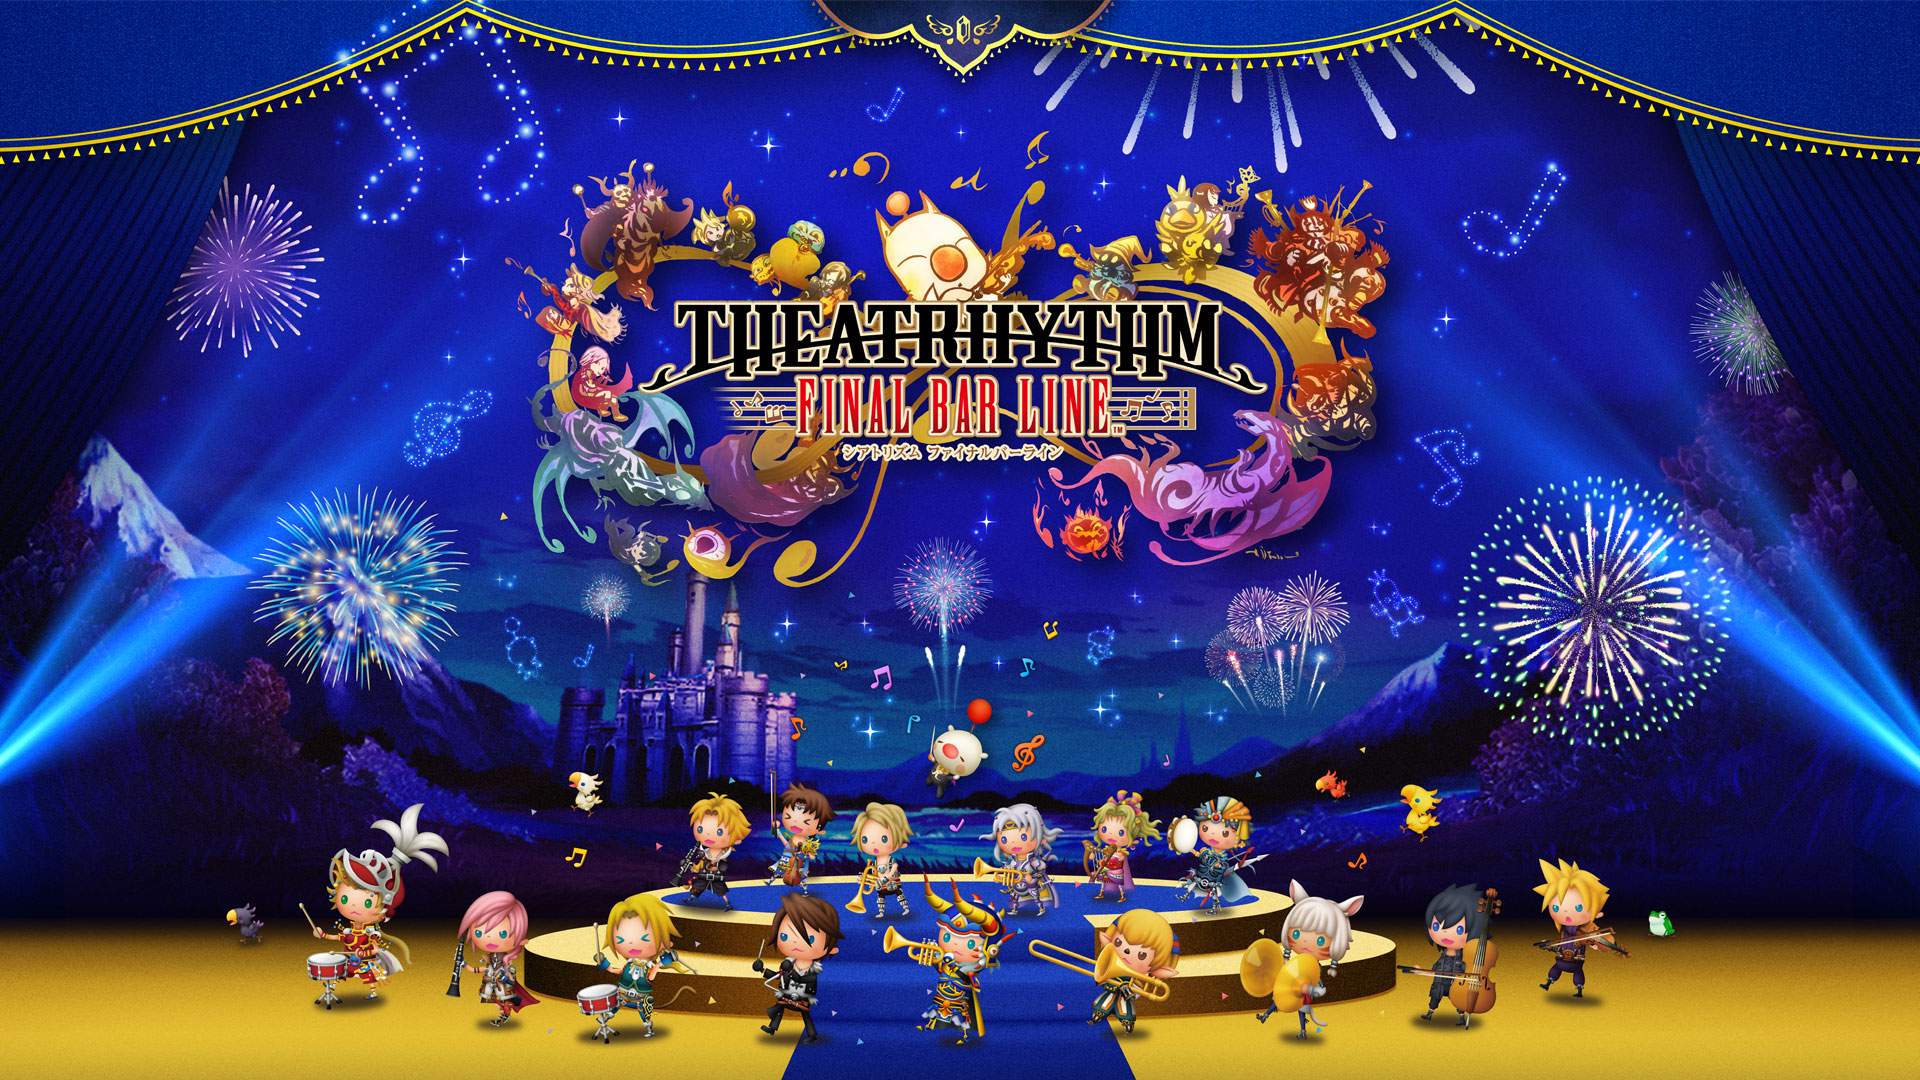 Image for 3DS sleeper hit series, Final Fantasy Theatrhythm, finally comes to PS4 and Switch in 2023